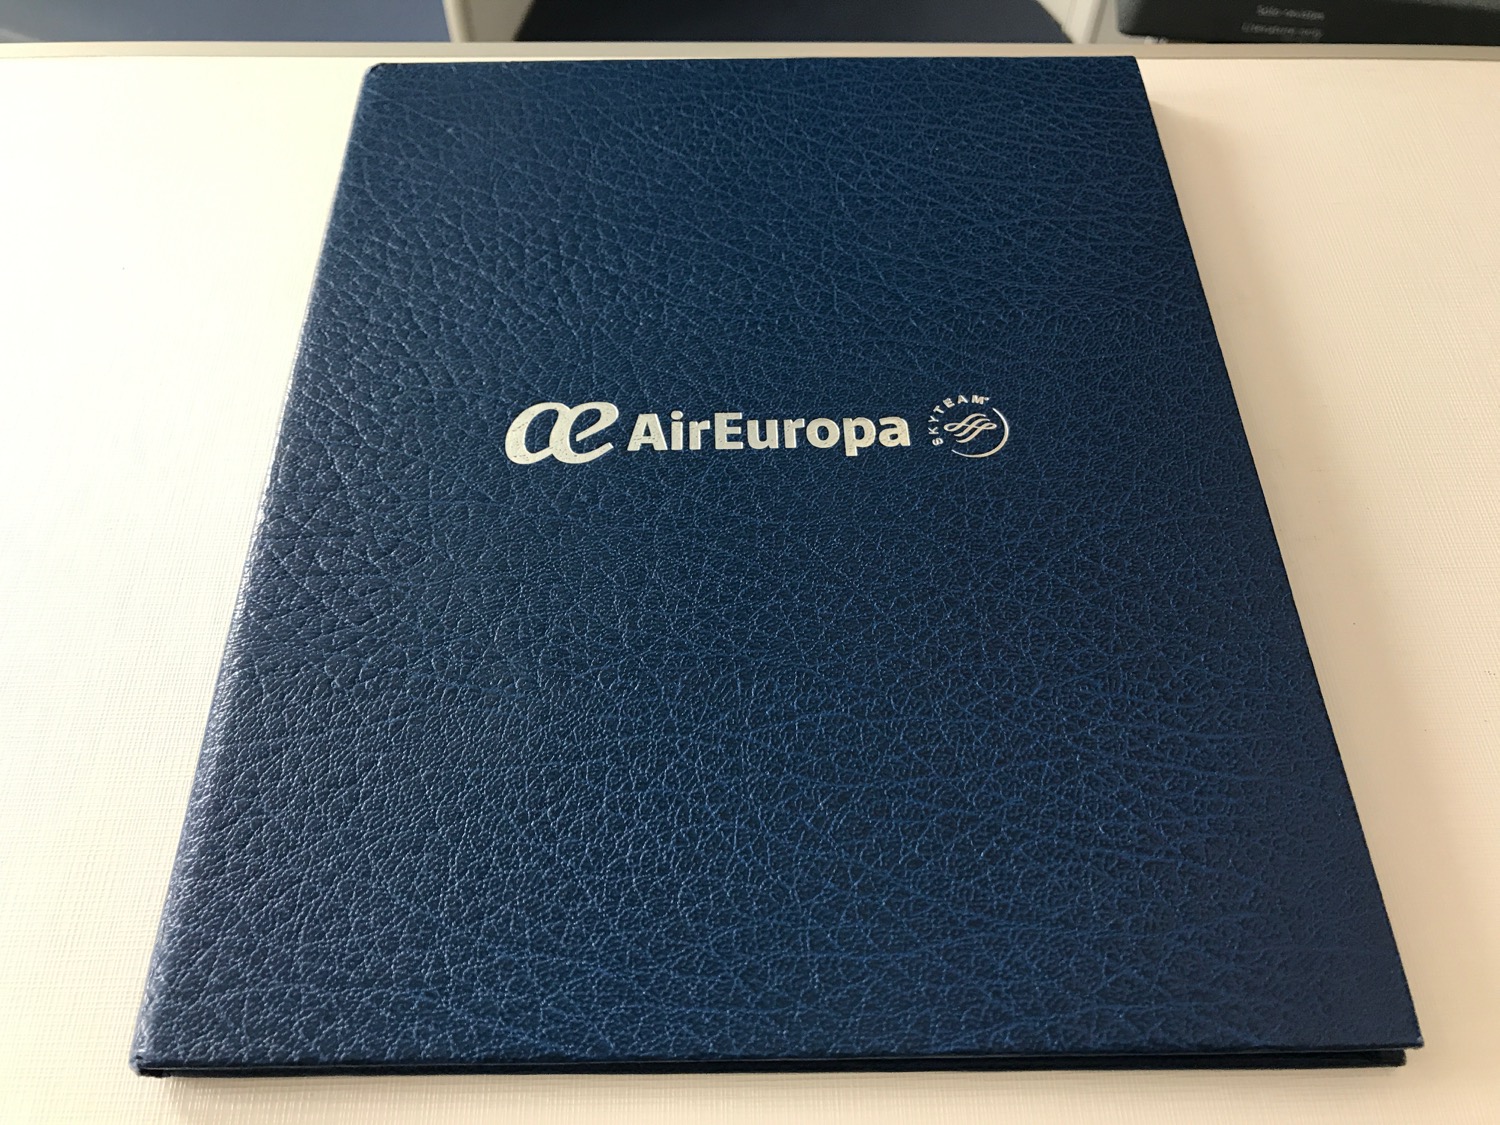 a blue leather folder with white text on it